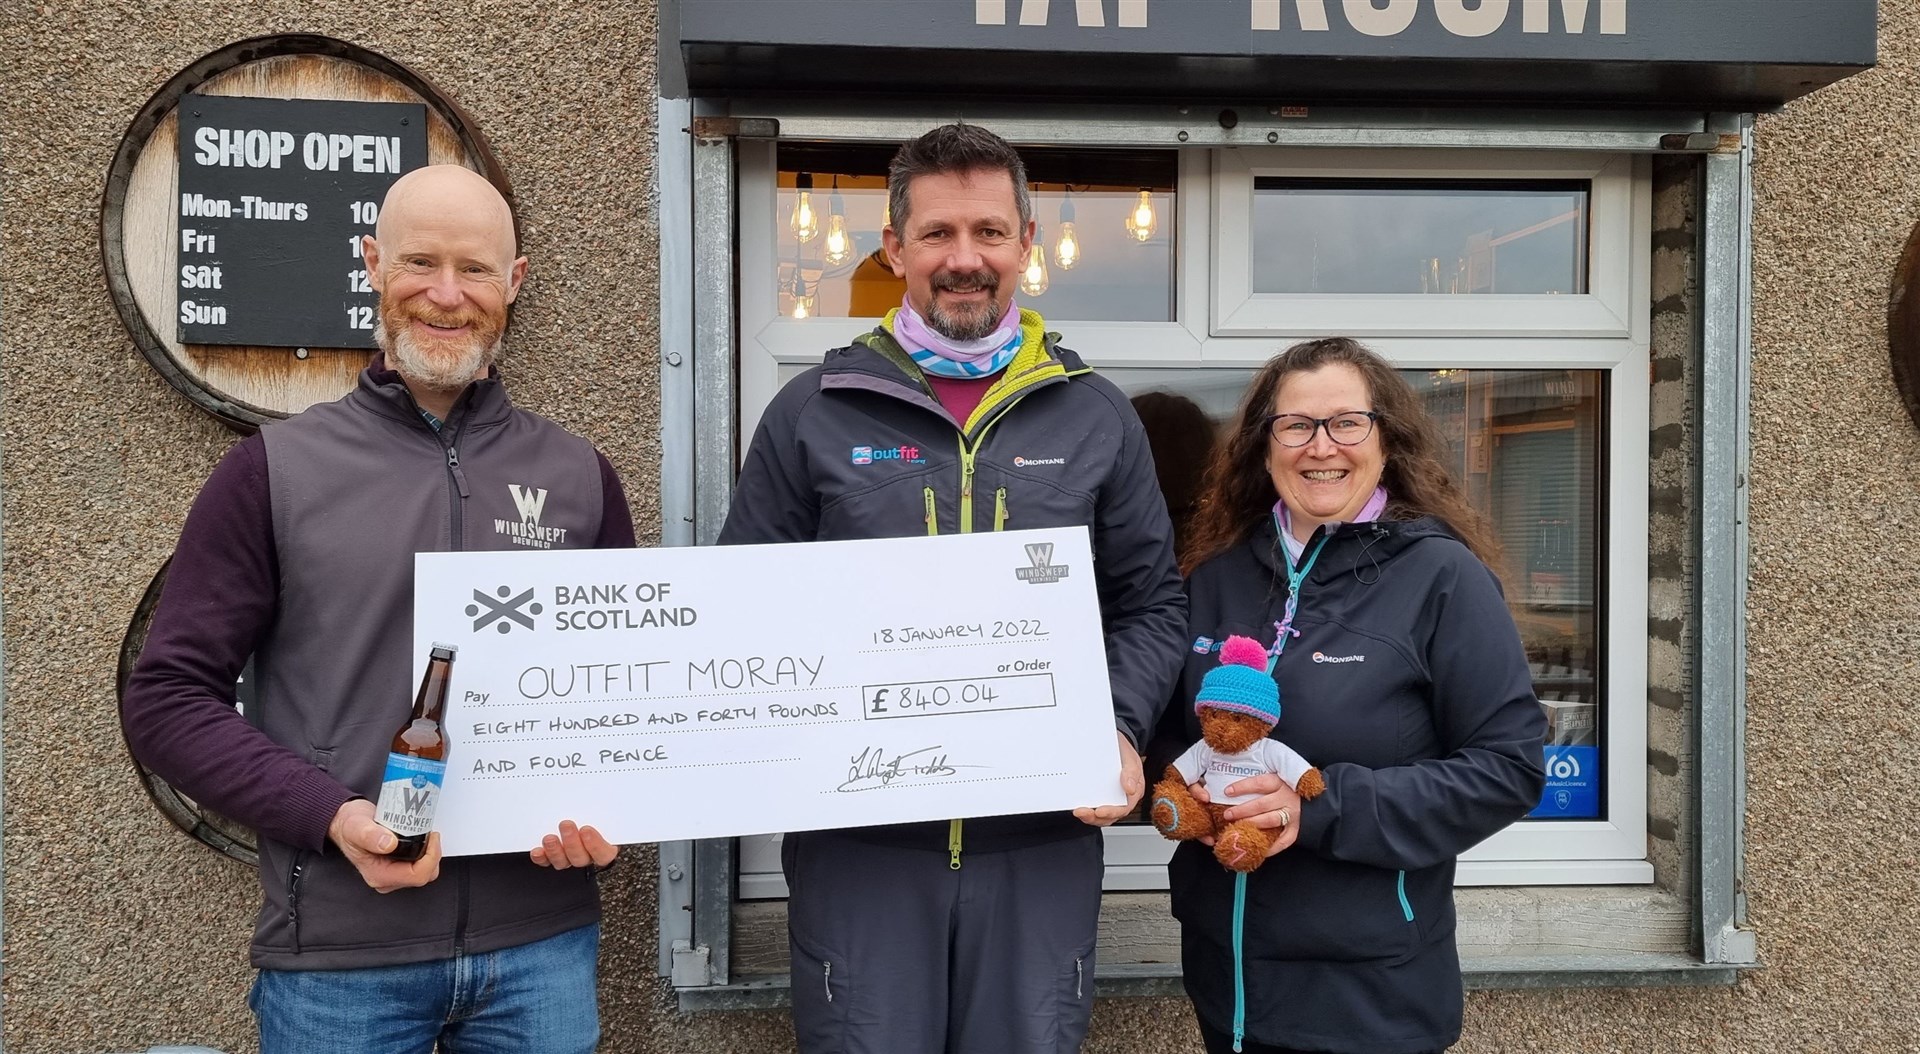 Nigel Tiddy, left, hands over a cheque for £840 to Outfit Moray.